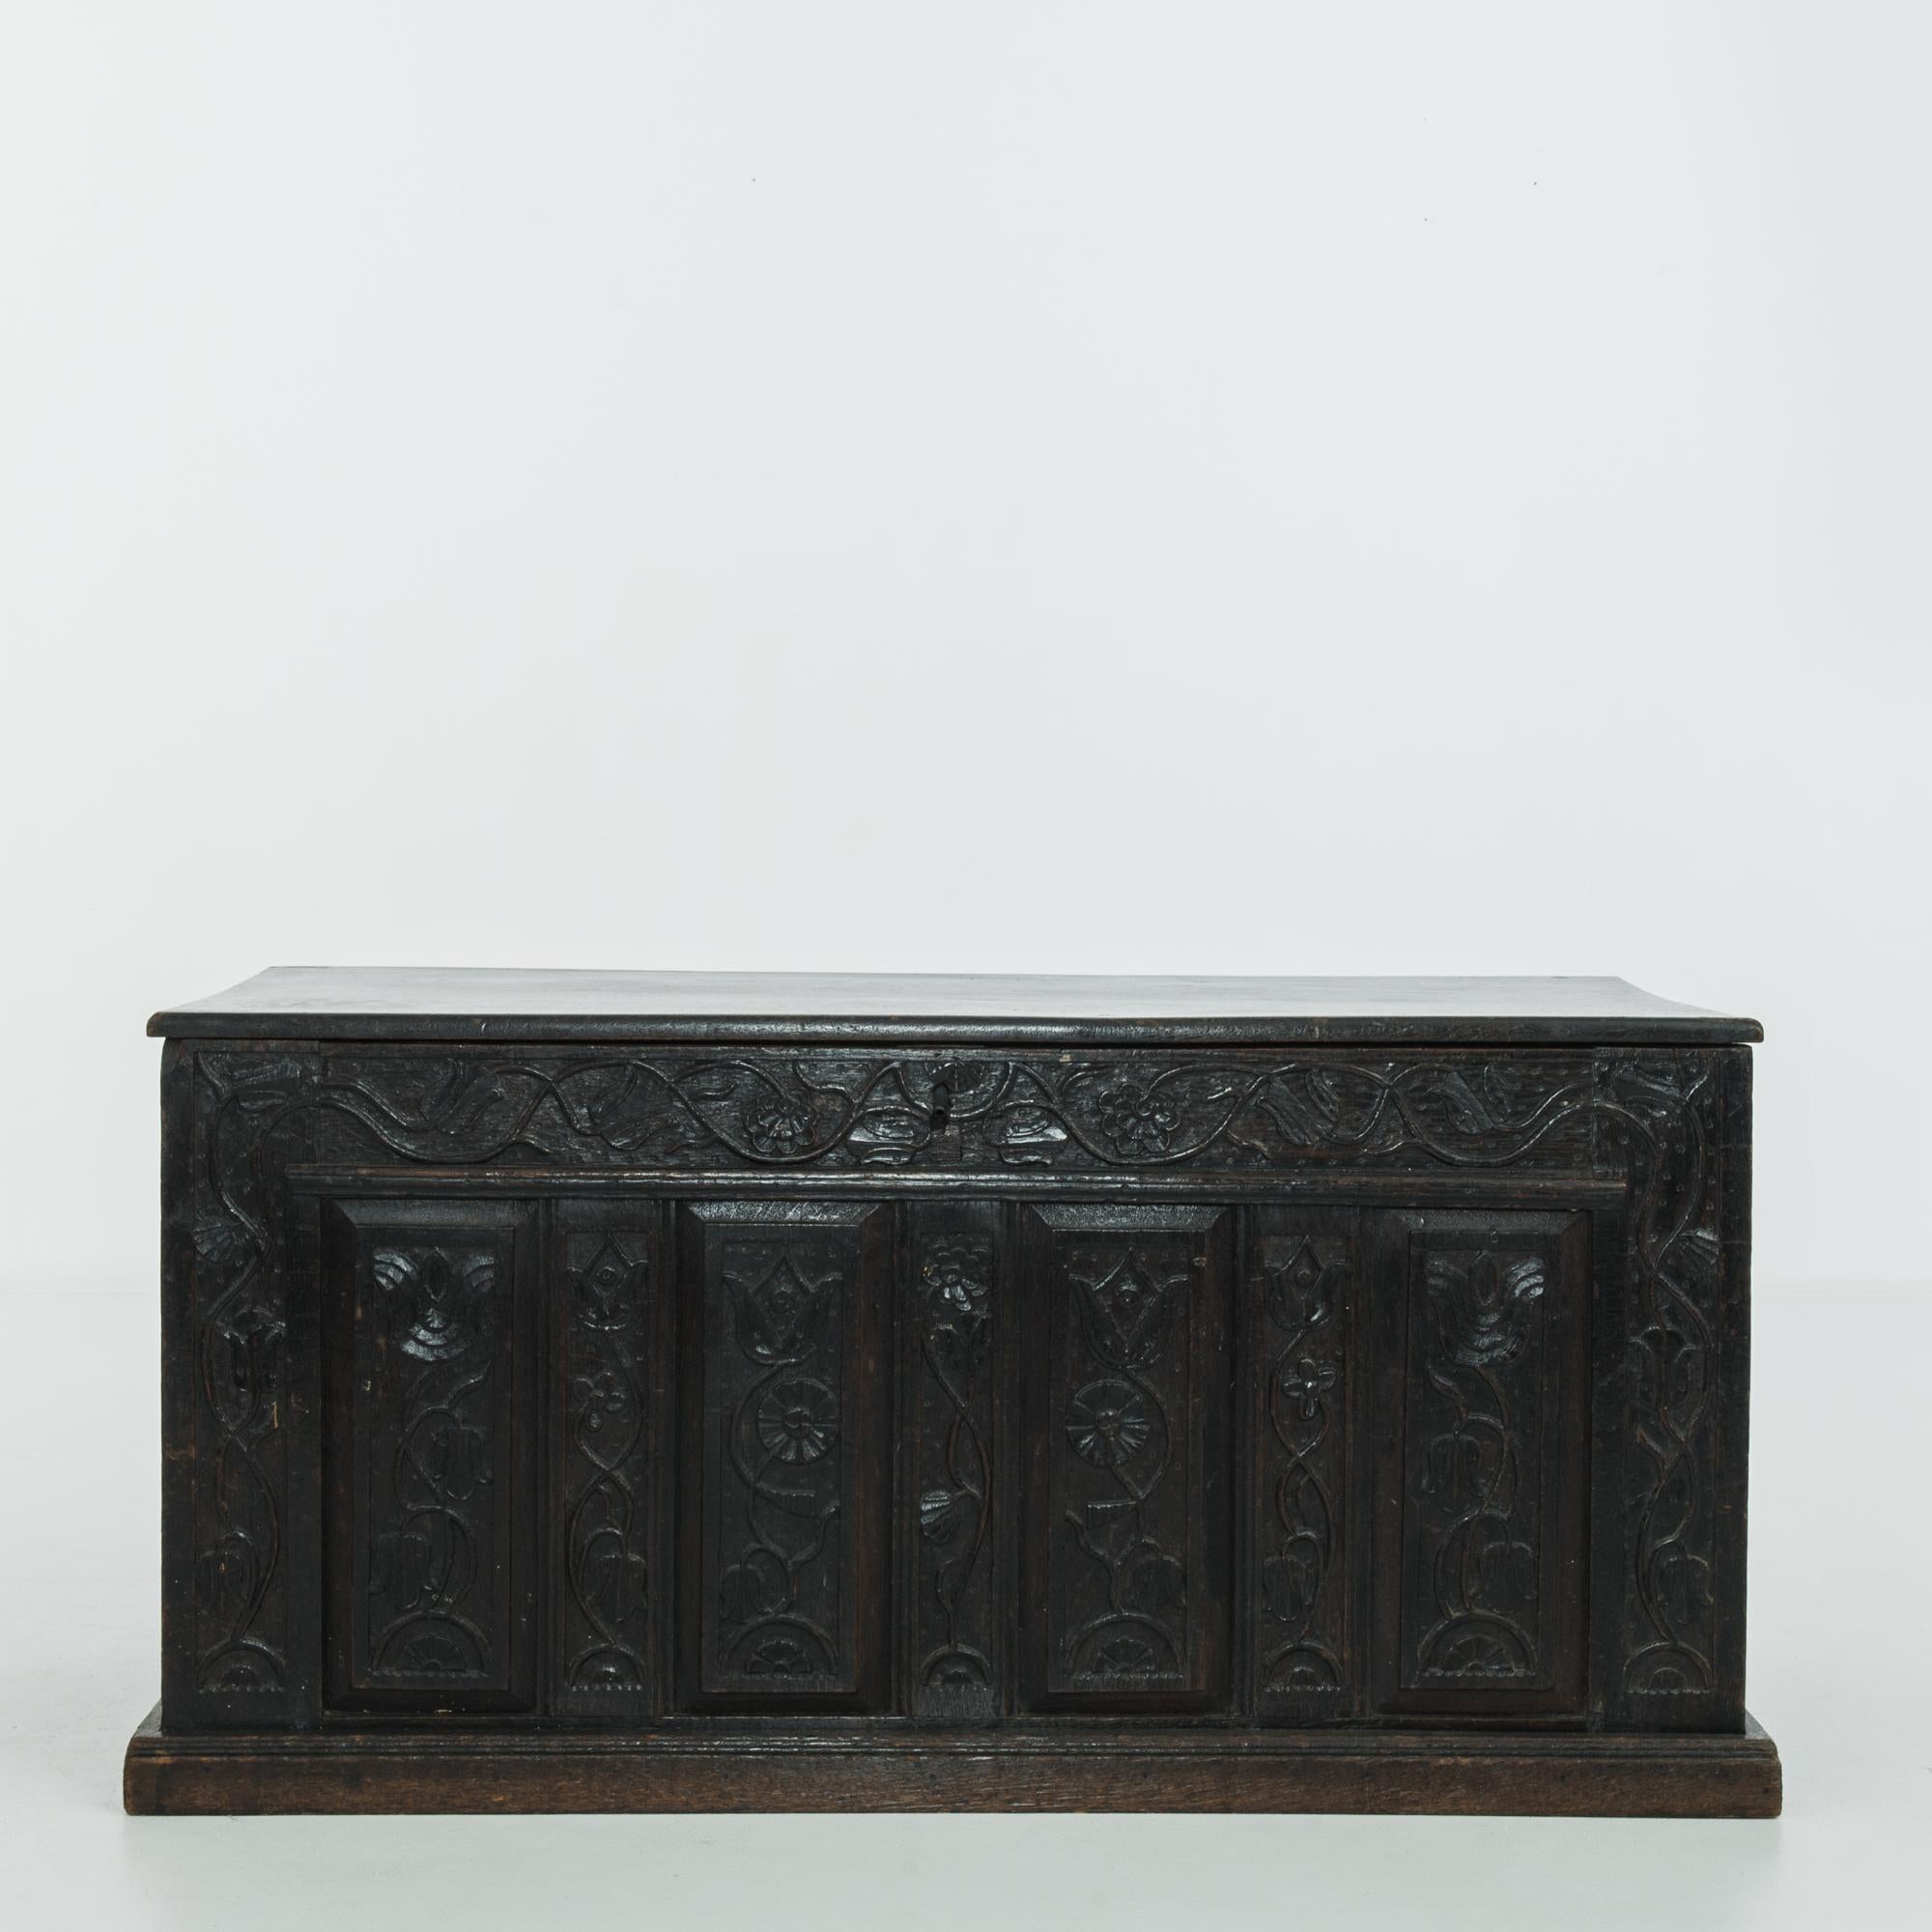 Romantic carvings and the deep ebony tone of the original patina give this wooden trunk an evocative aesthetic. Made in Germany, circa 1800, twining leaves and flowers decorate the paneled wood. The dark finish of the wood has a subtle, midnight